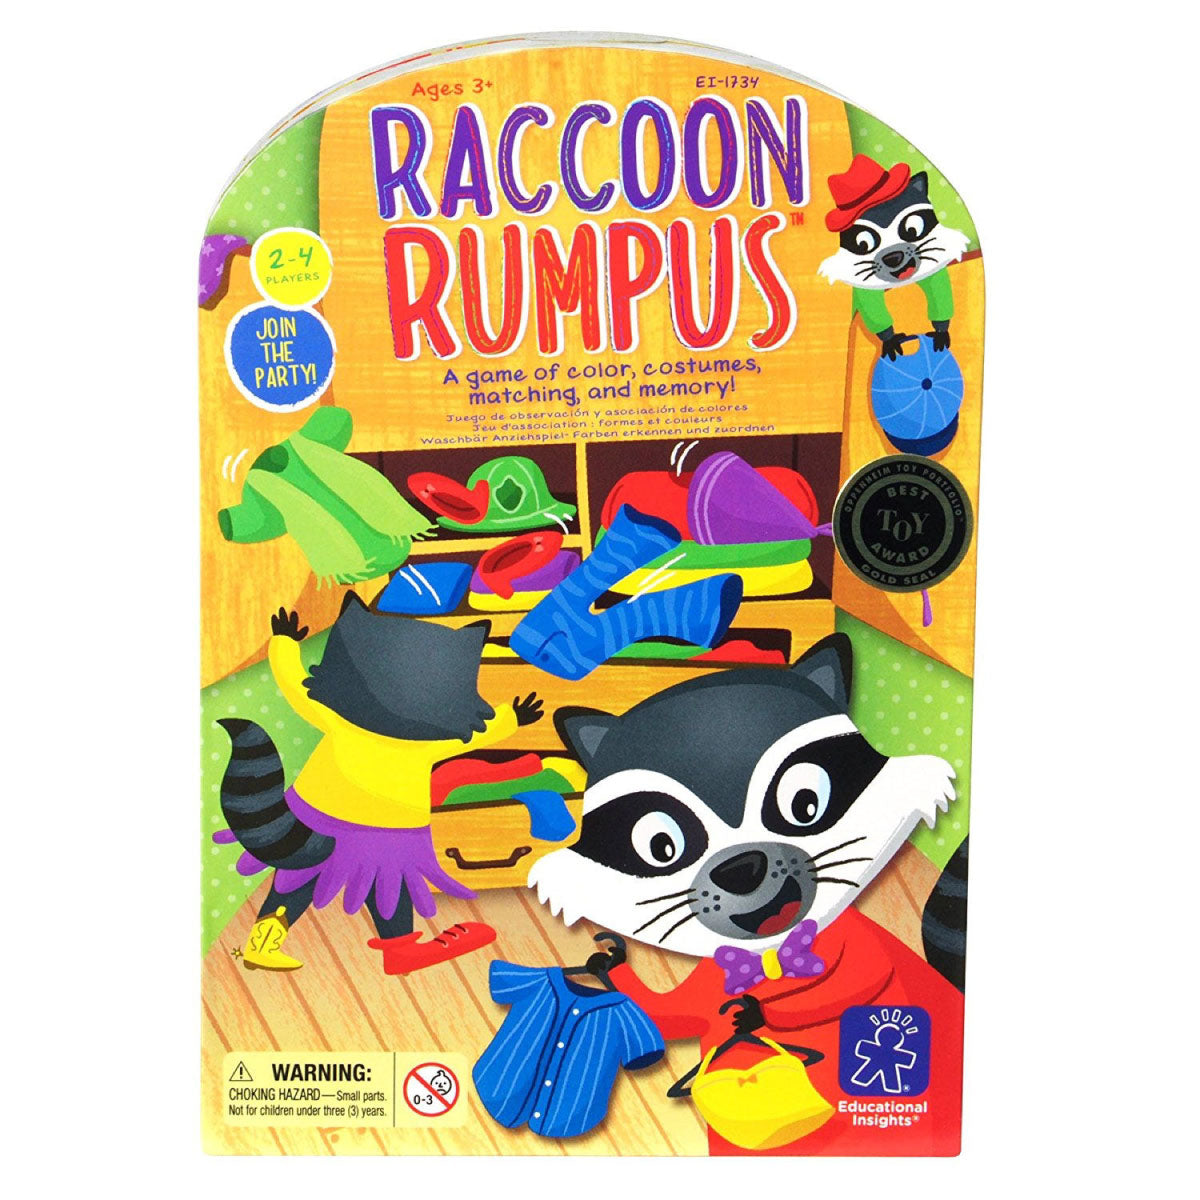 Raccoon Rumpus Color Matching Game from Educational Insights